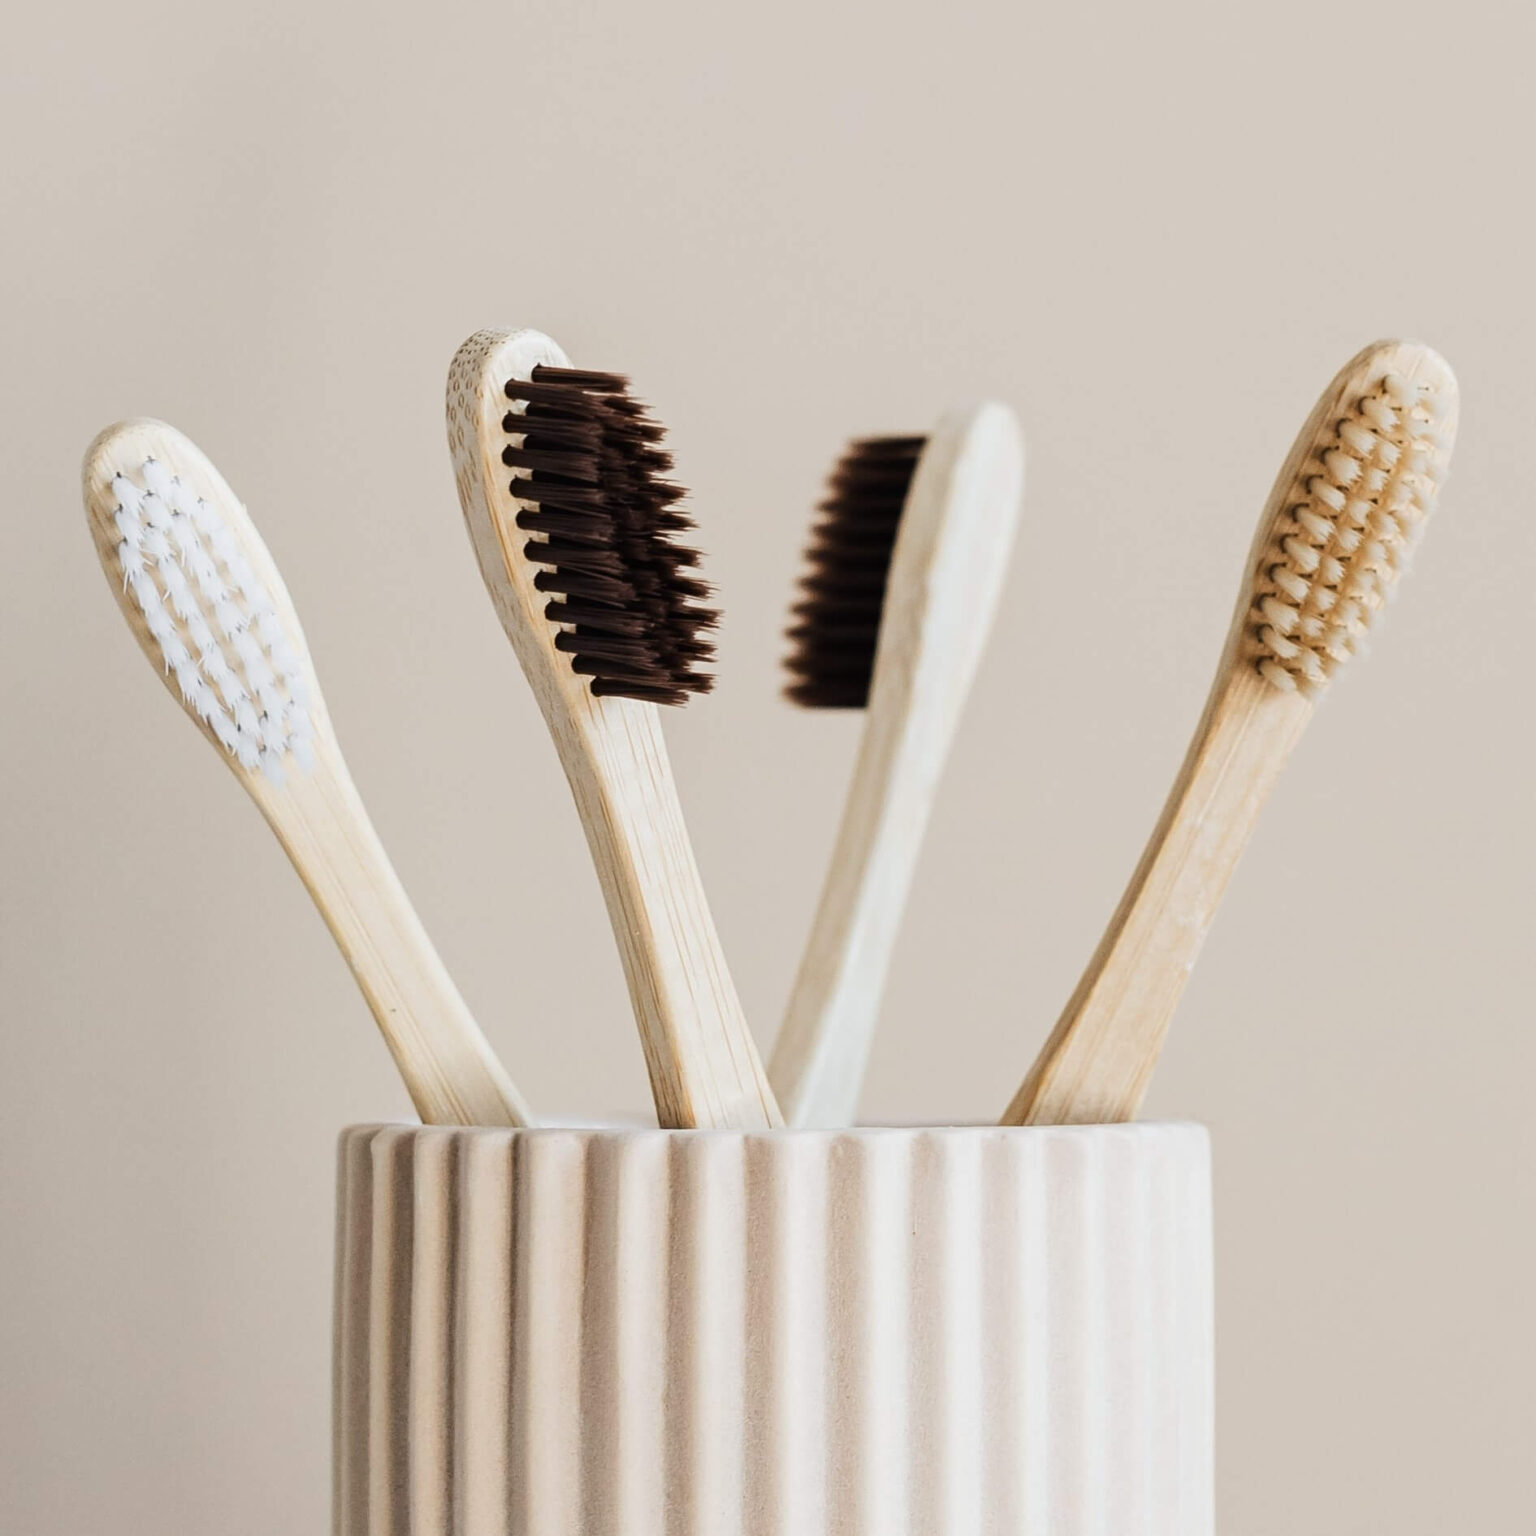 How To Store Bamboo Toothbrush